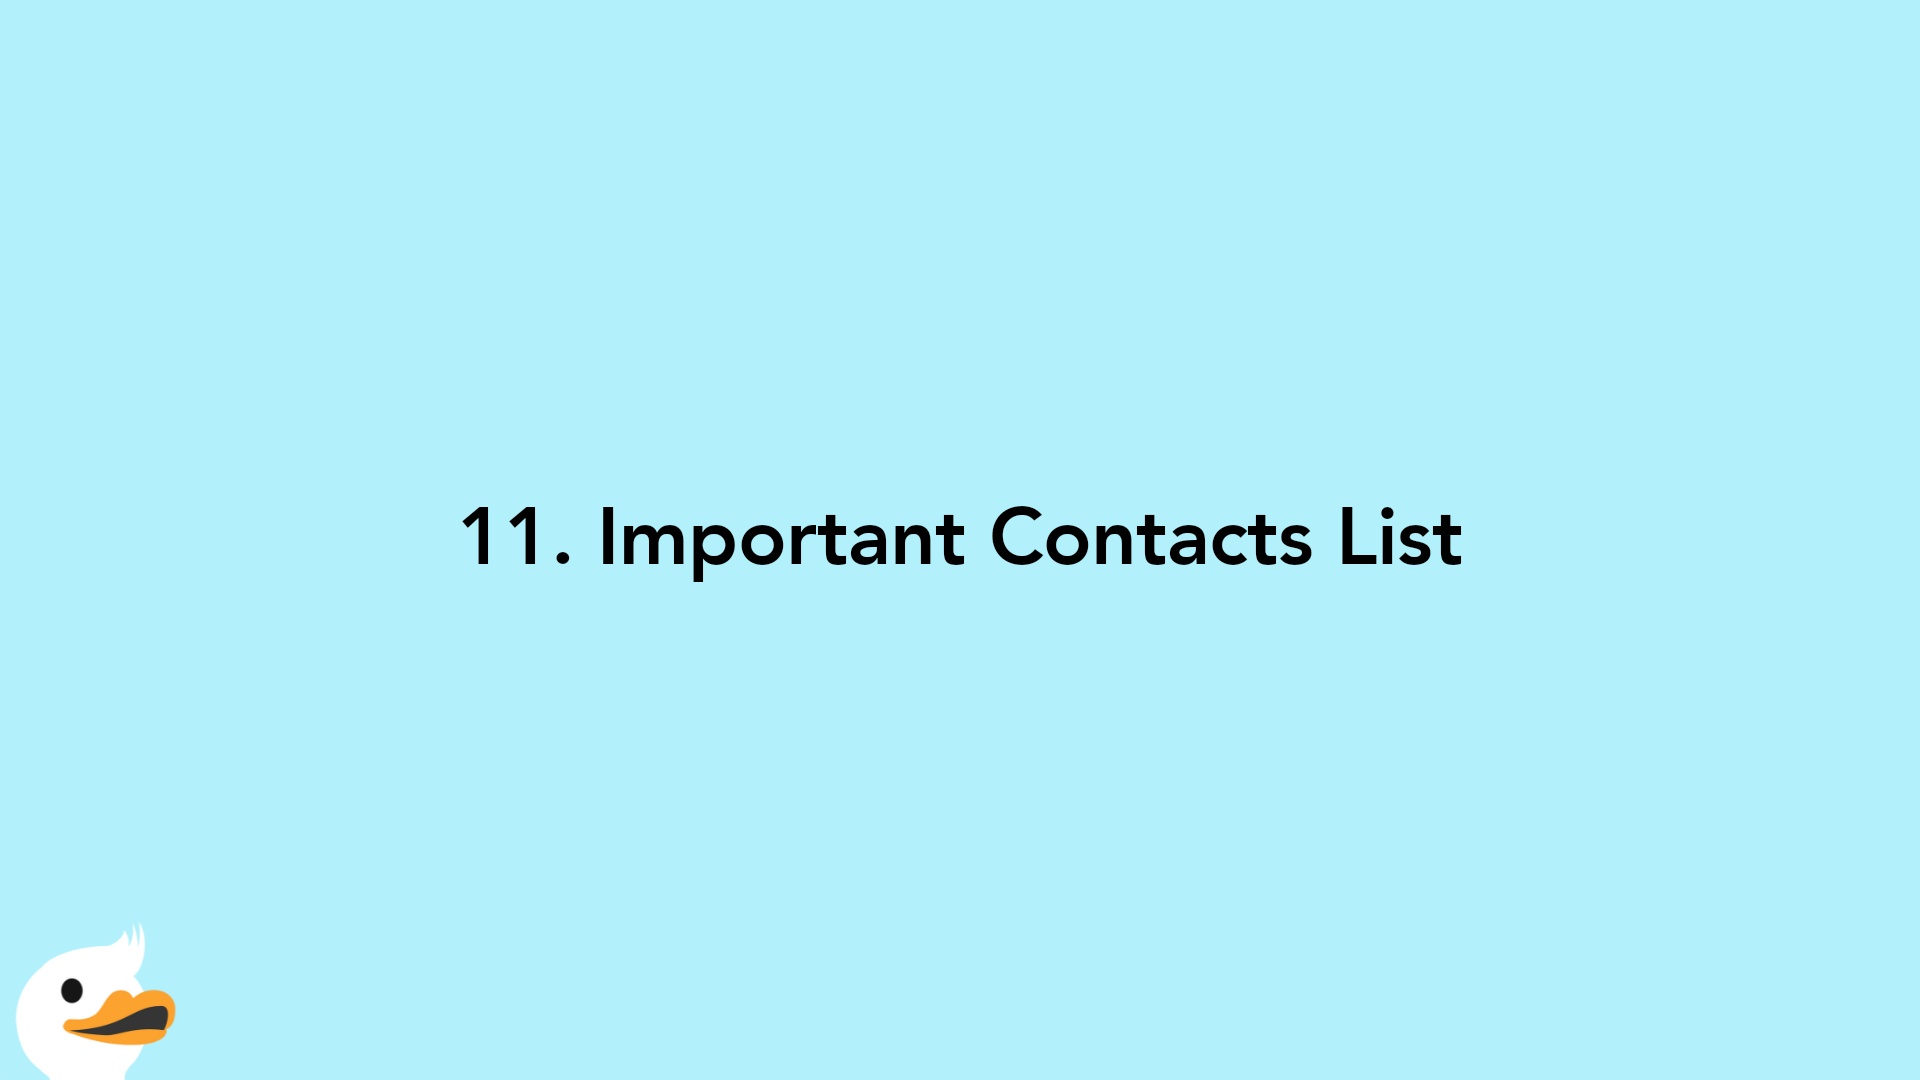 11. Important Contacts List